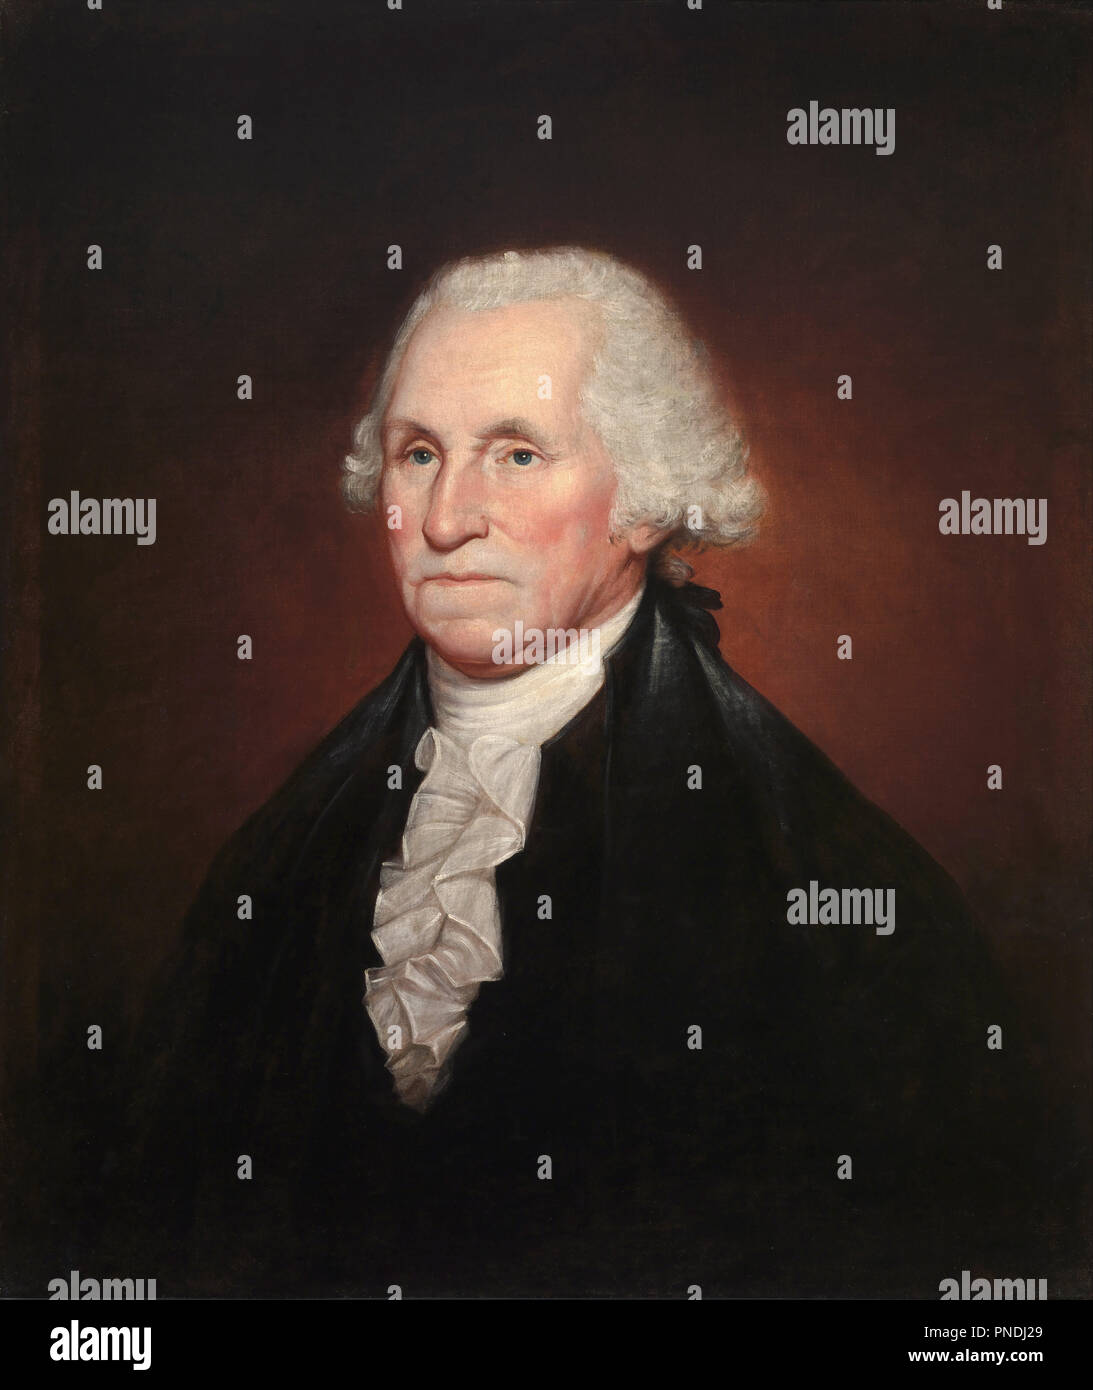 George Washington. Date/Period: 1795. Painting. Oil on canvas. Height: 756 mm (29.76 in); Width: 645 mm (25.39 in). Author: REMBRANDT PEALE. GILBERT STUART. Stock Photo